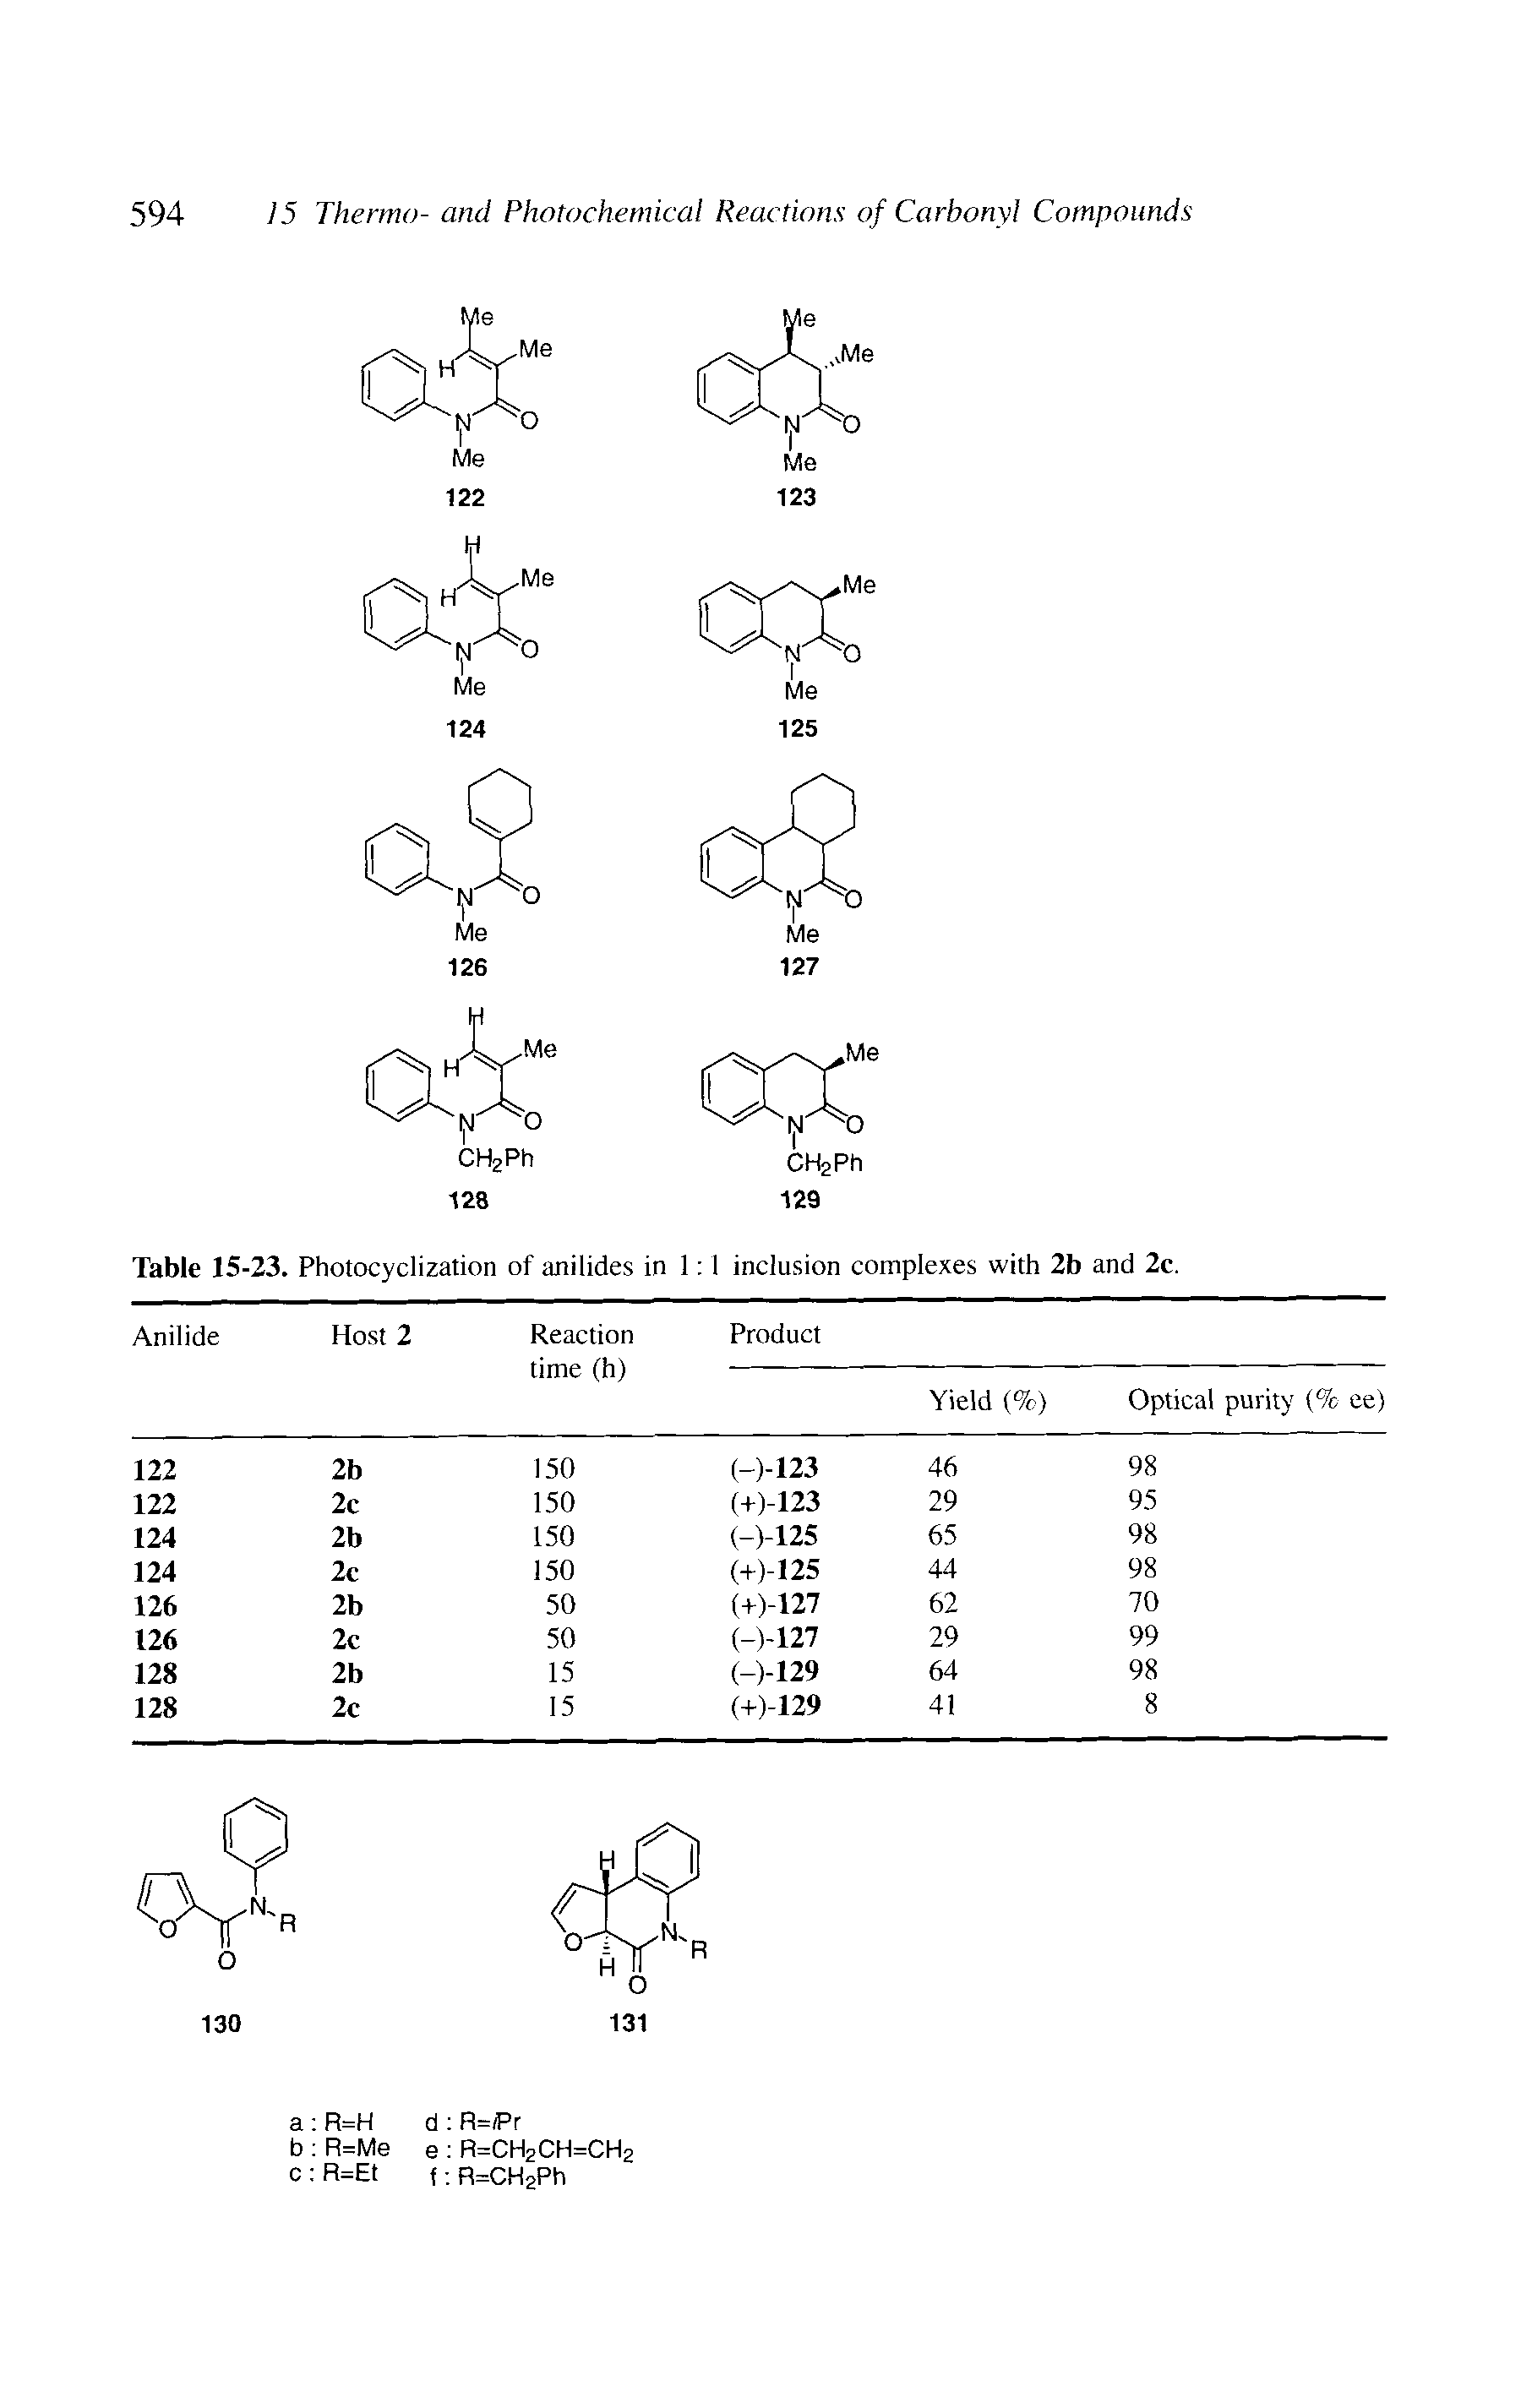 Table 15-23. Photocyclization of anilides in 1 1 inclusion complexes with 2b and 2c.